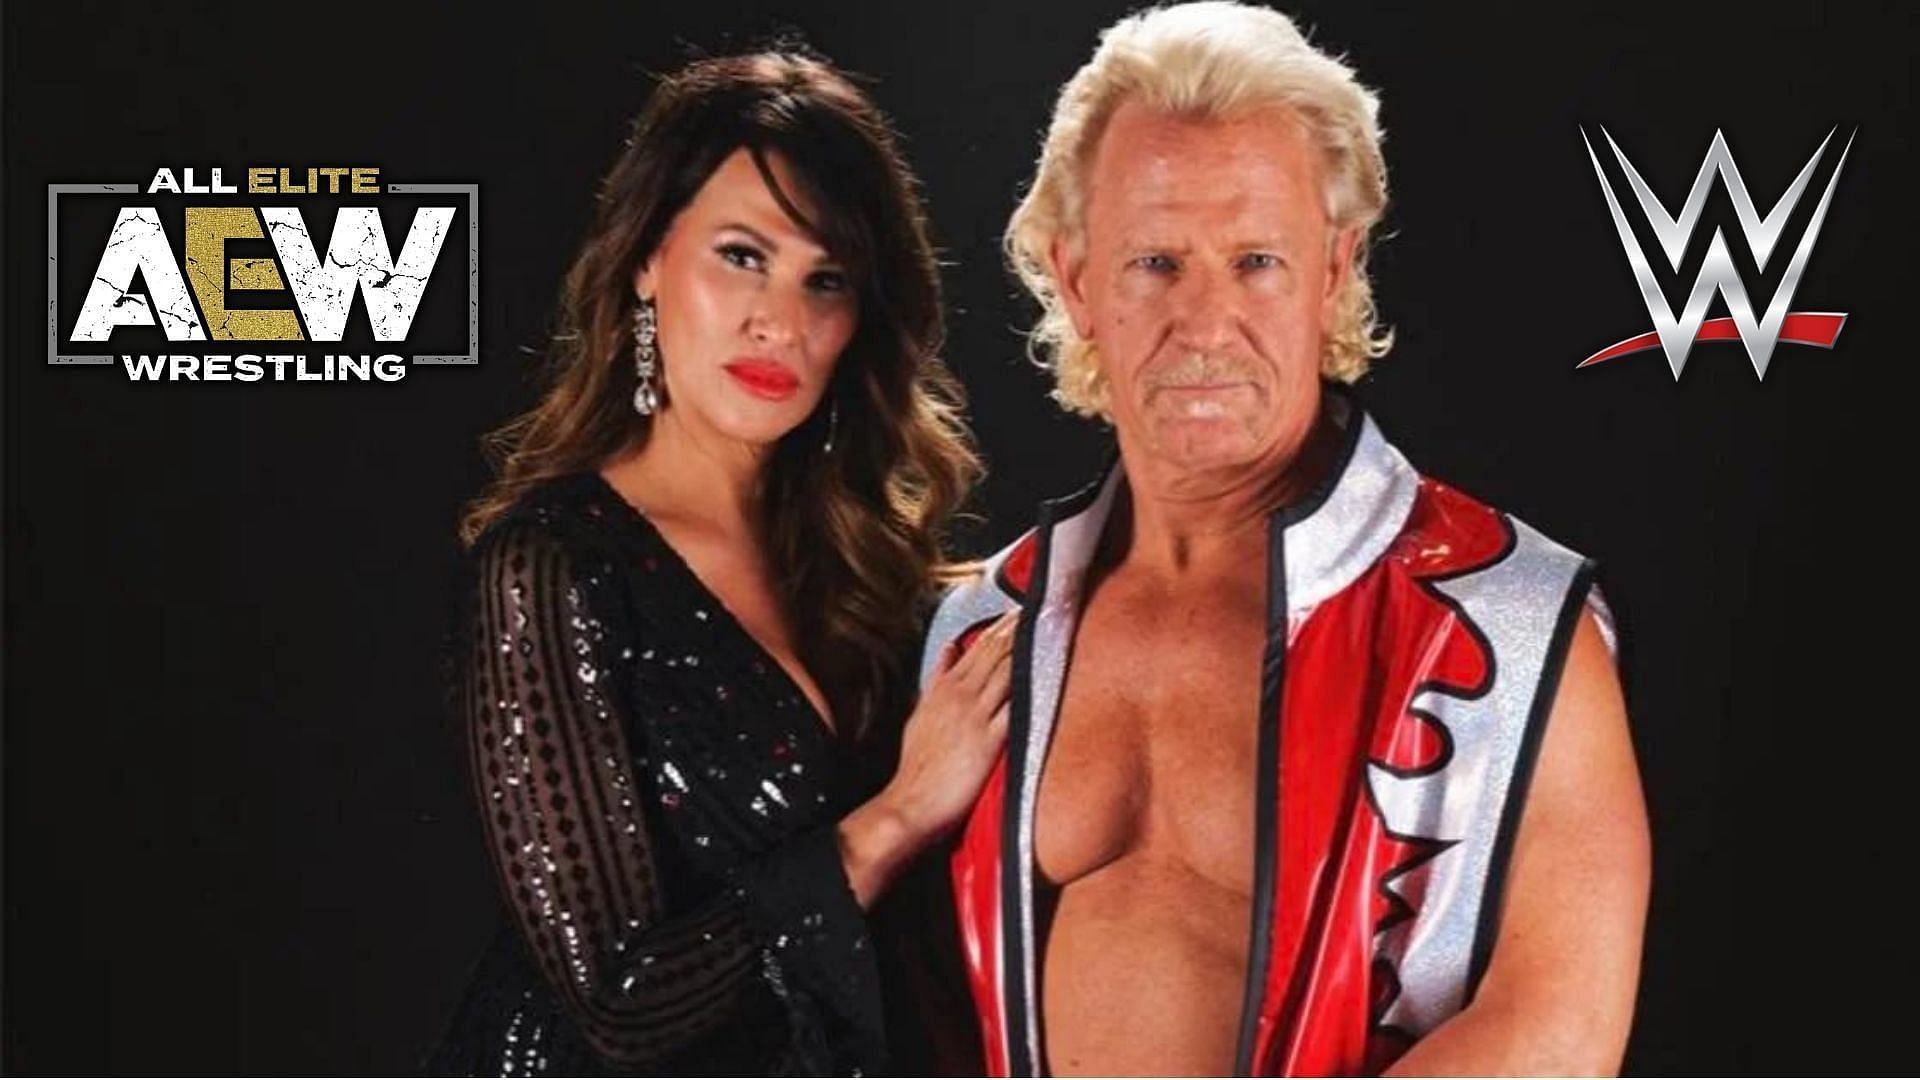 What you do in your personal life is your personal business&quot; - WWE veteran  on Jeff Jarrett&#039;s wife&#039;s rant about controversial AEW segment (Exclusive)